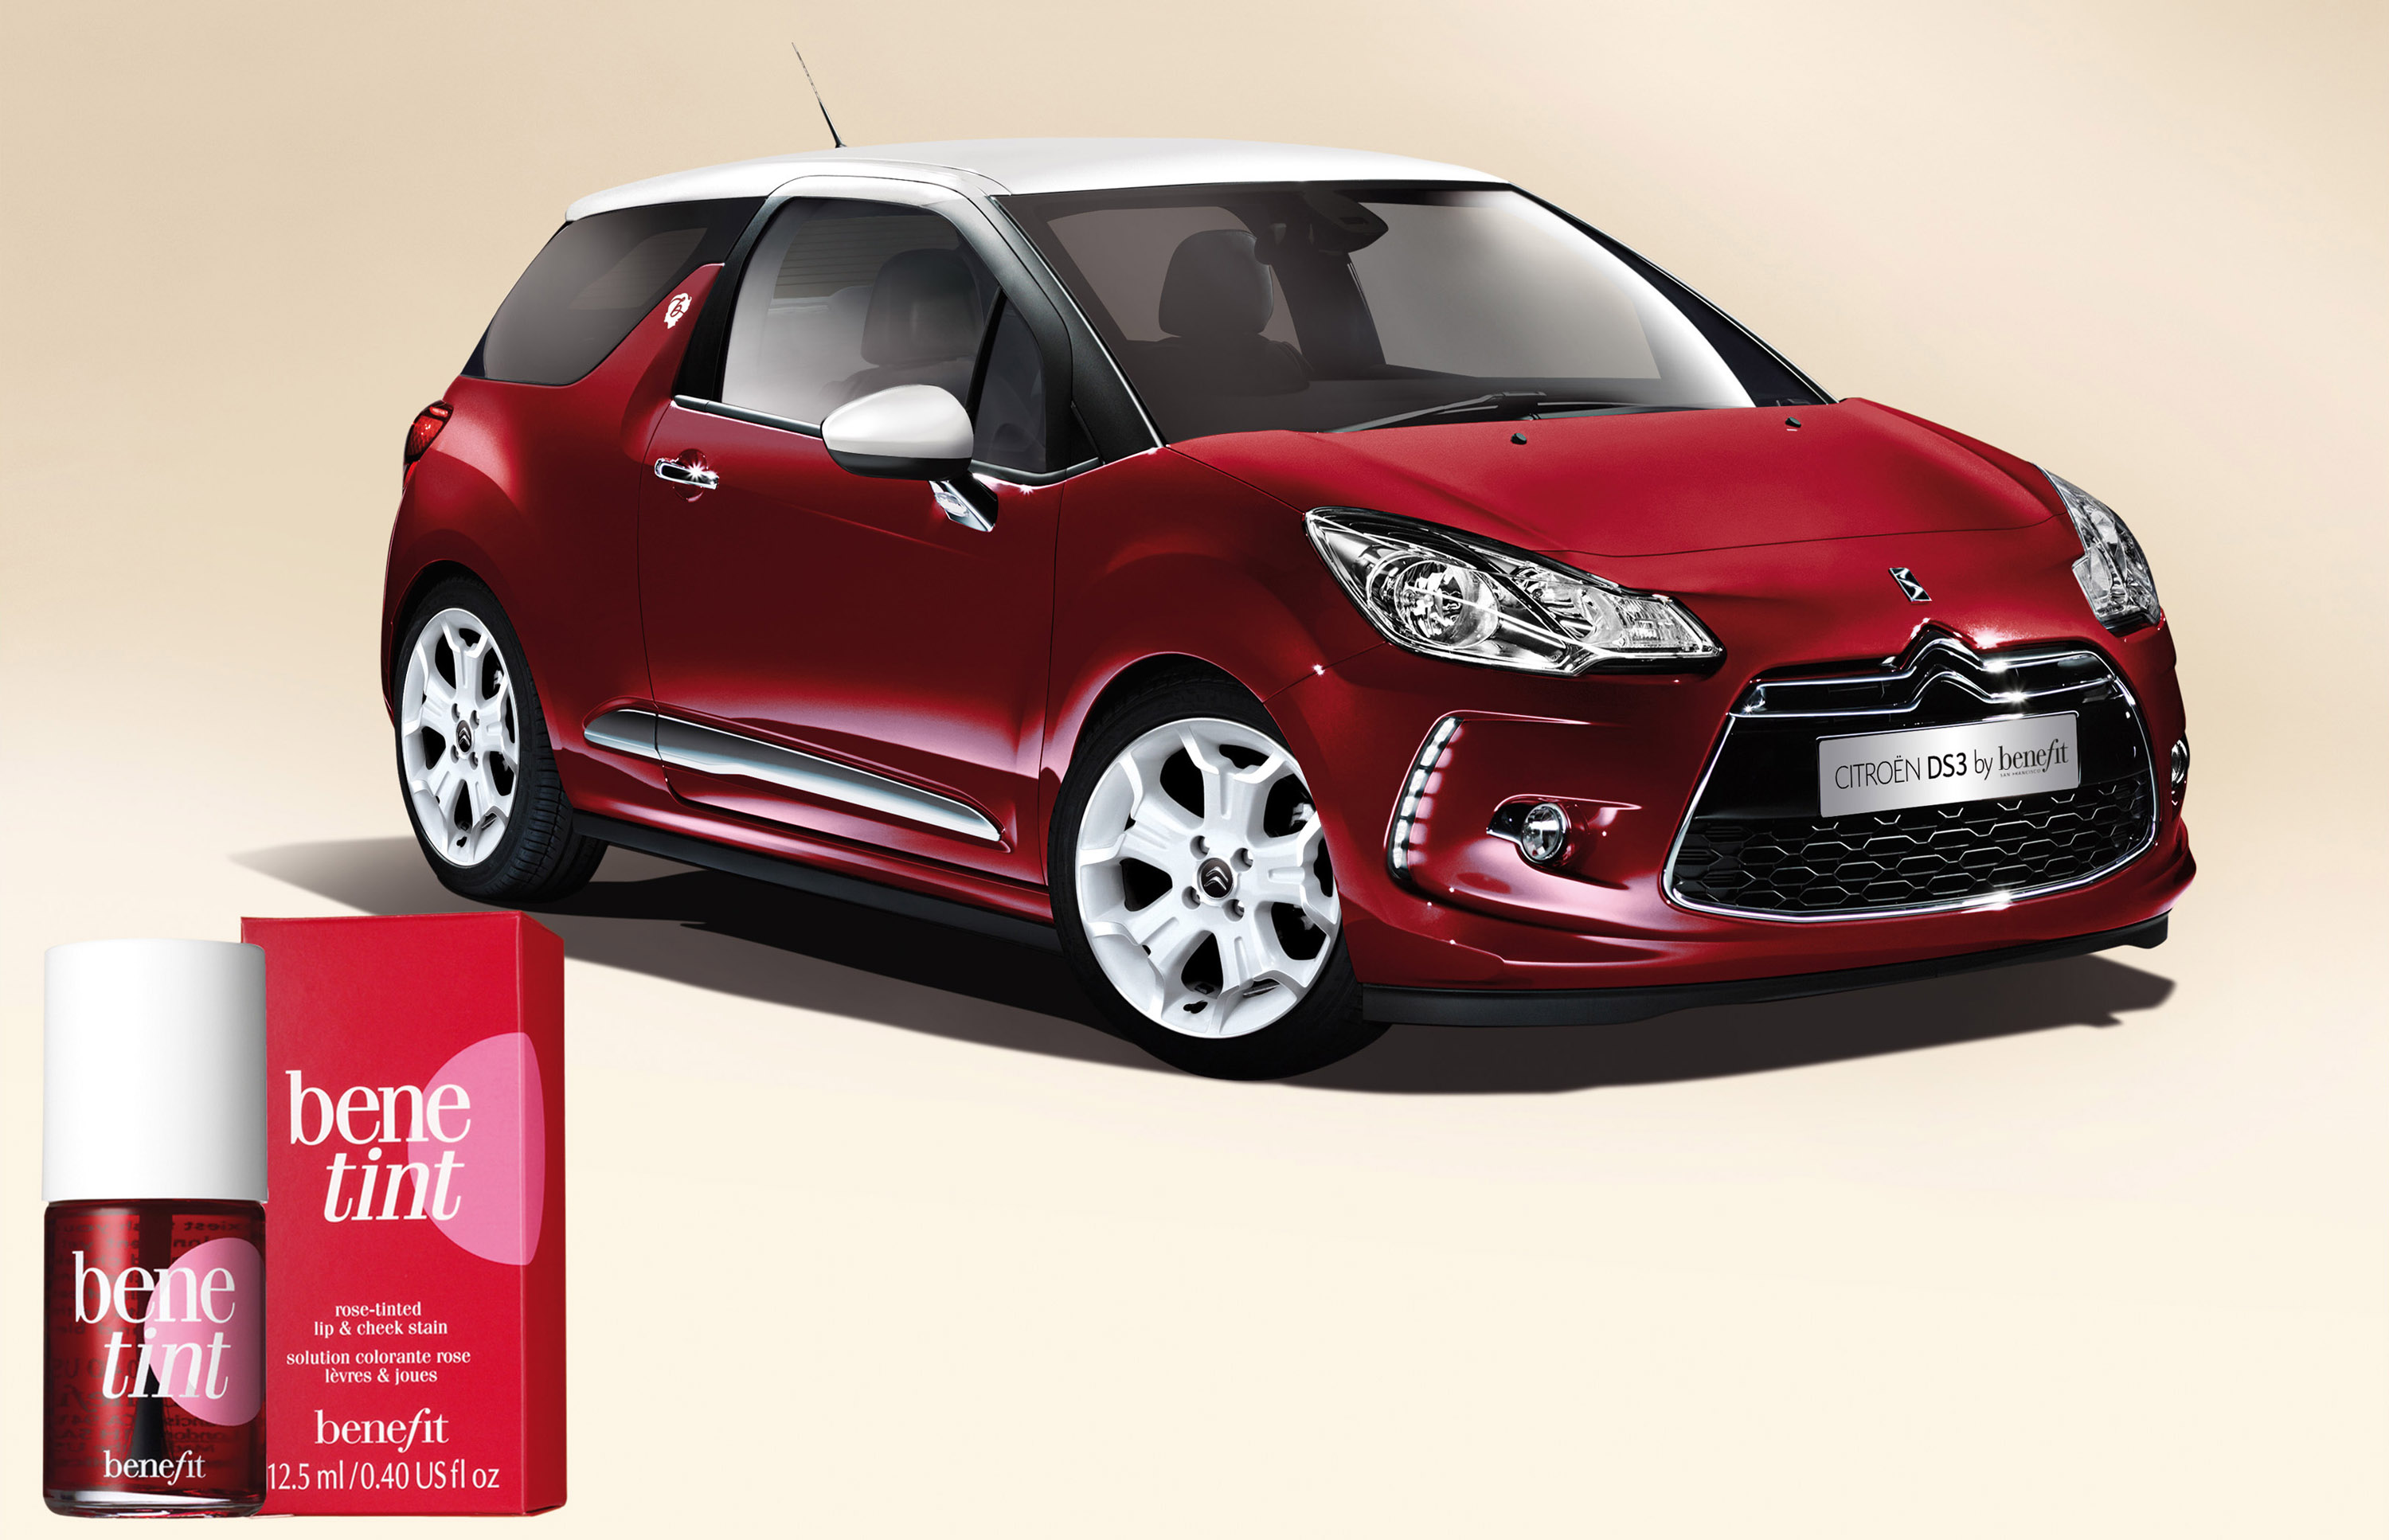 Benefit Citroen DS3 Special Editions photo #8